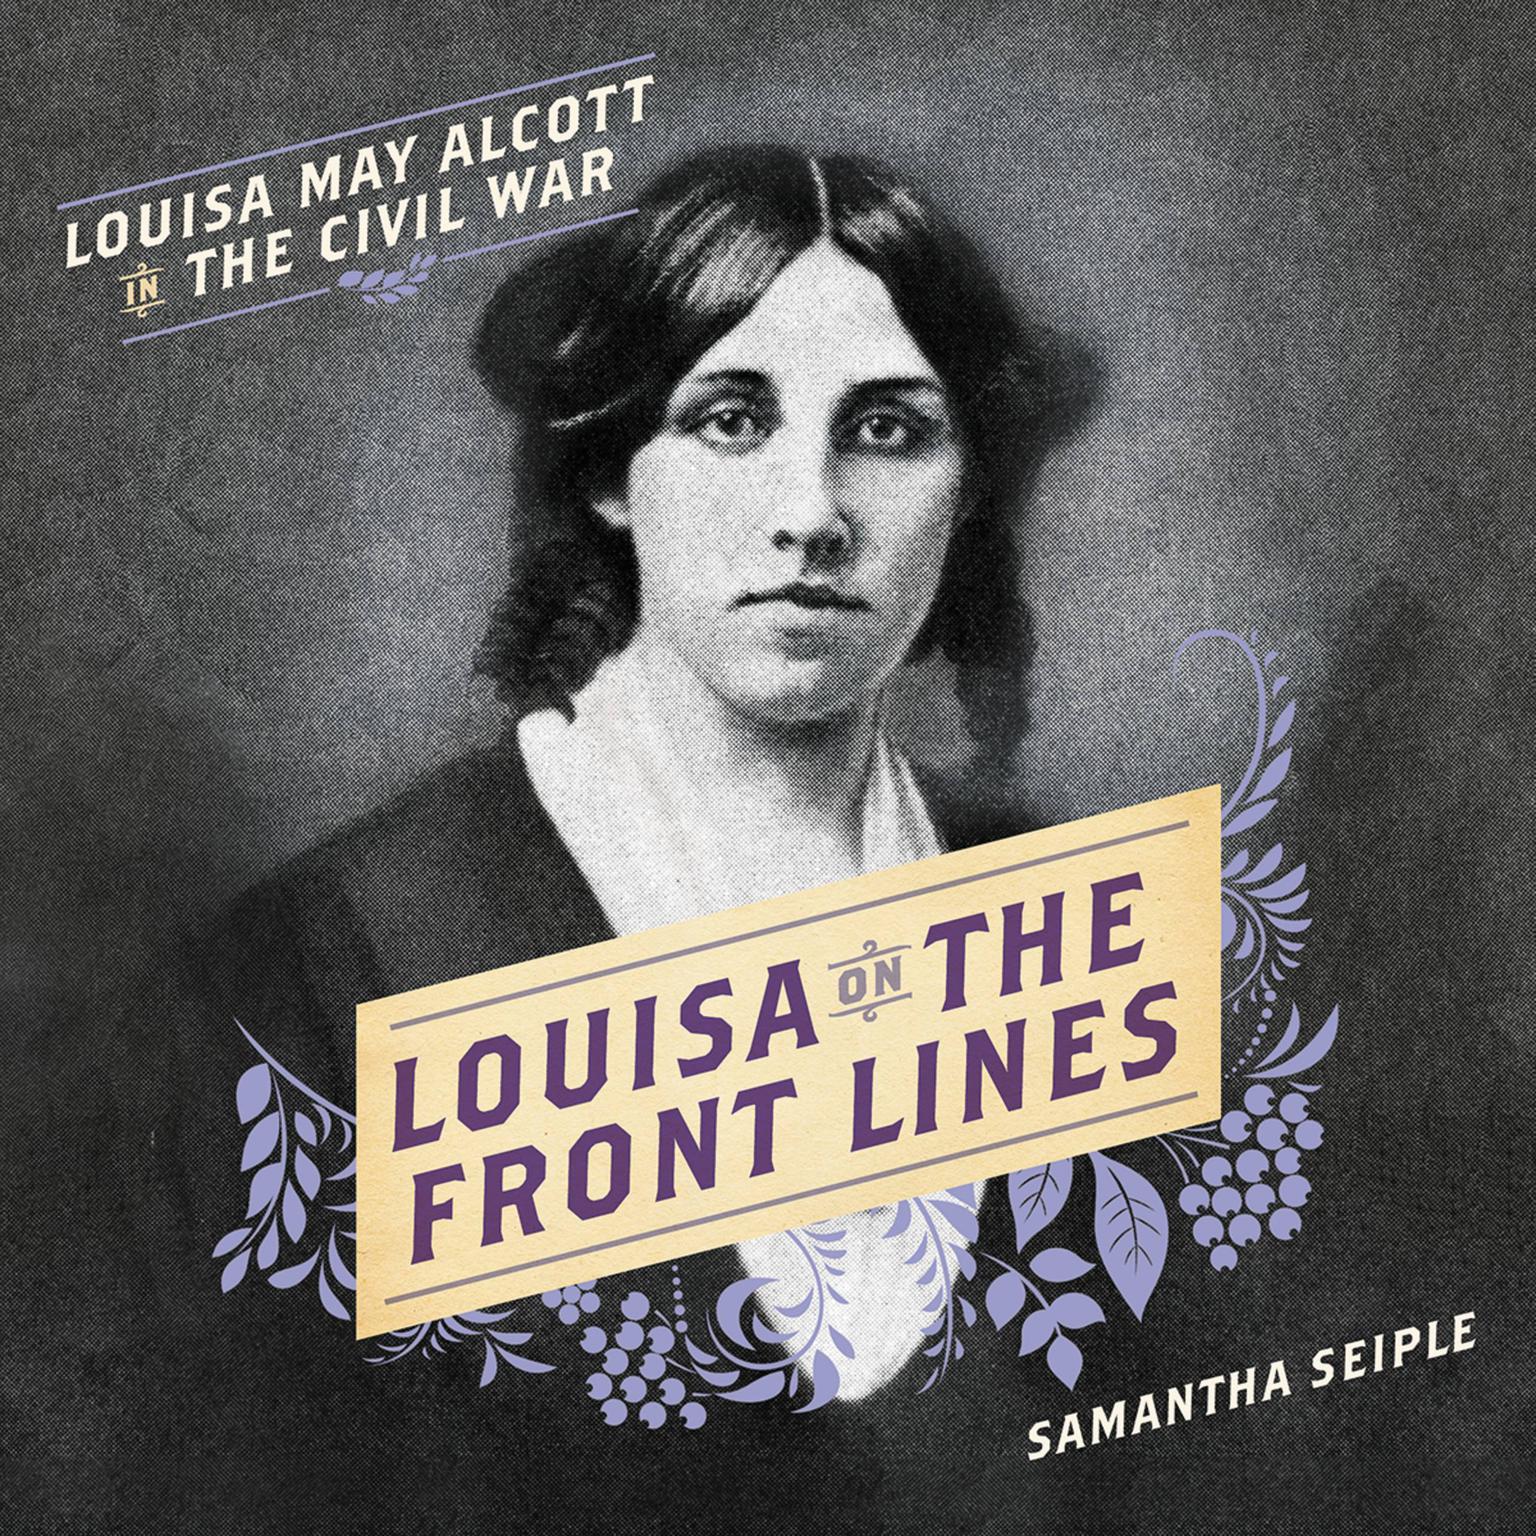 Louisa on the Front Lines: Louisa May Alcott in the Civil War Audiobook, by Samantha Seiple